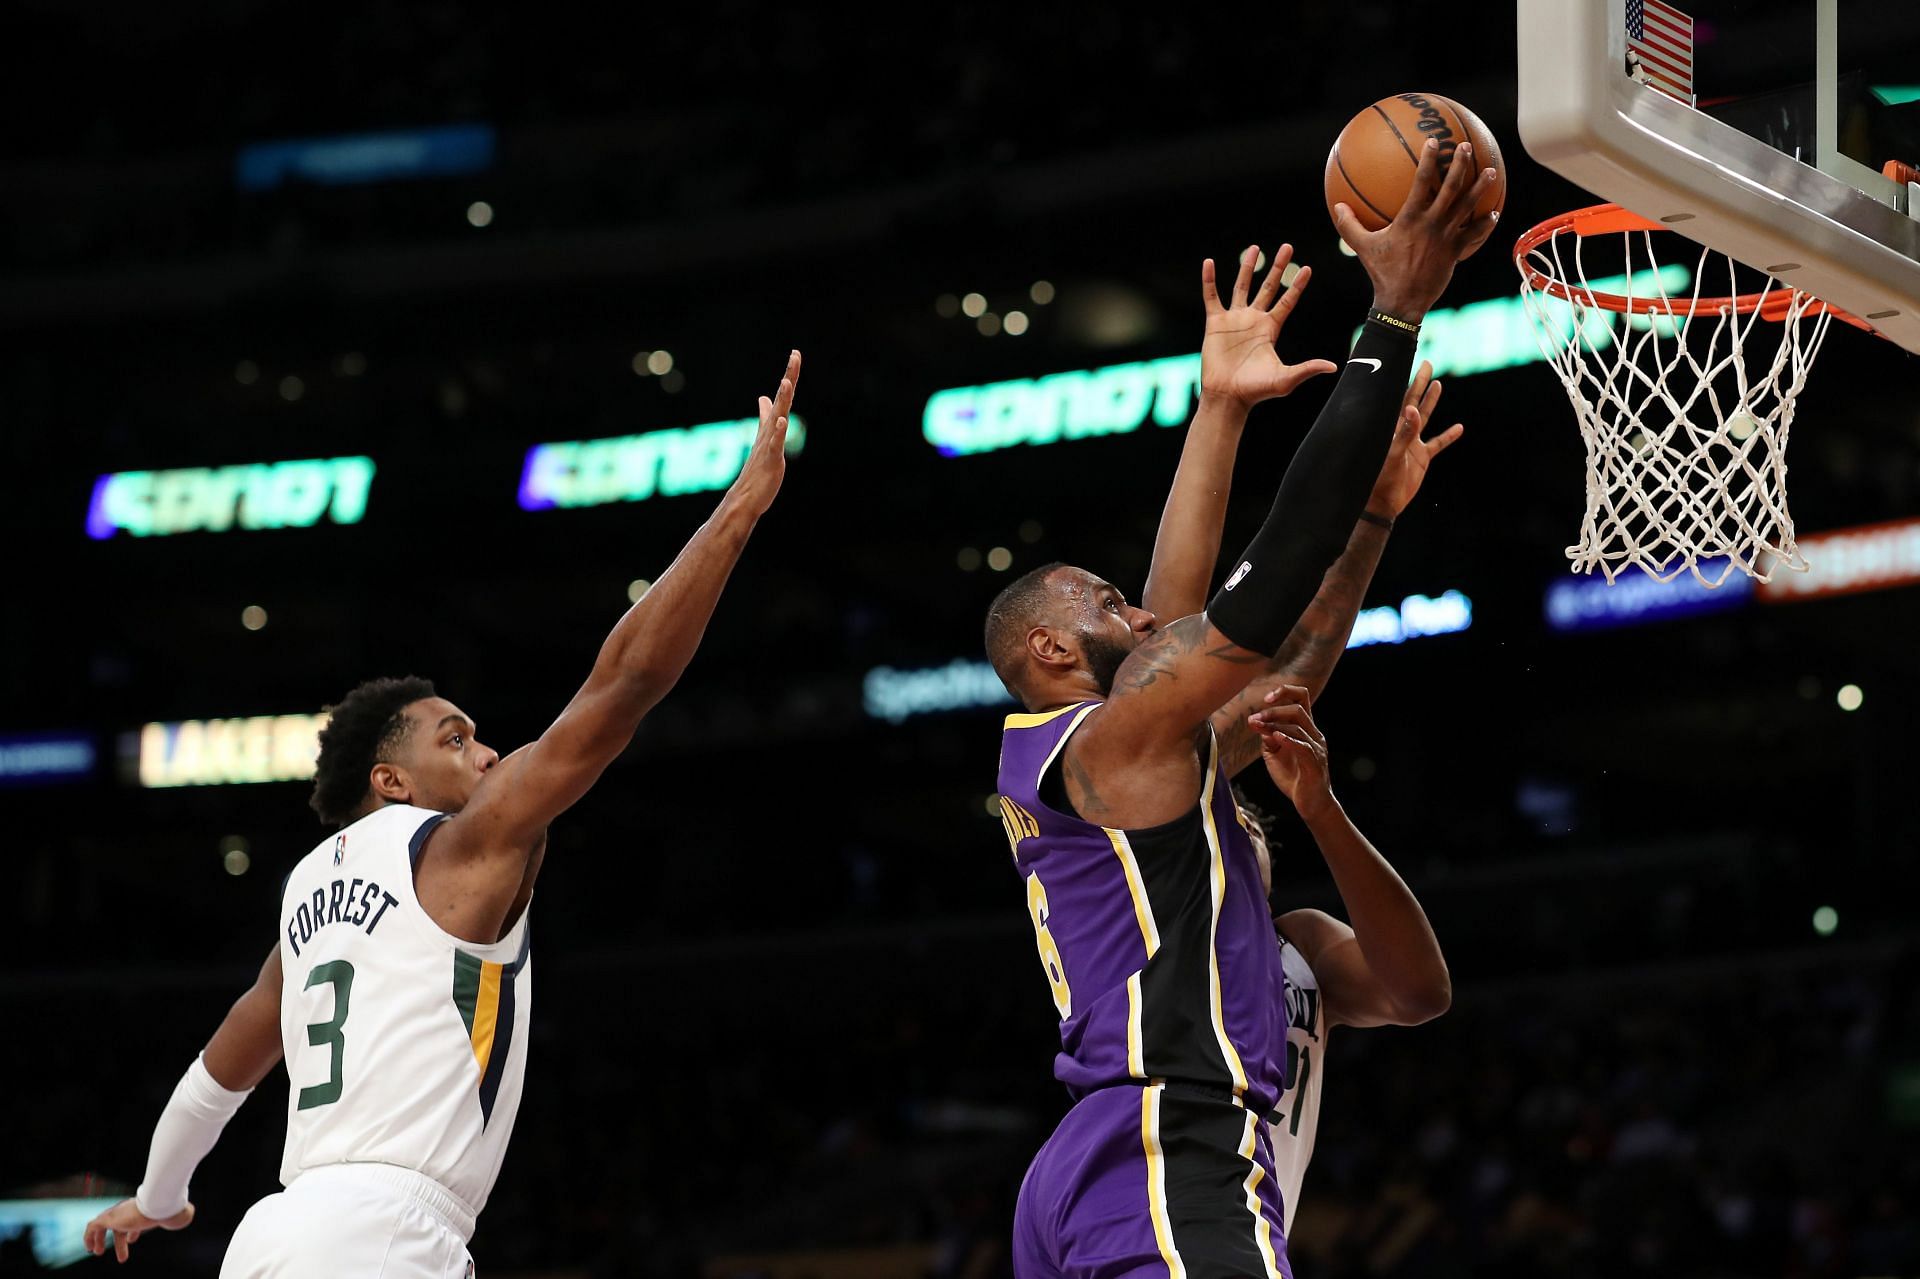 LeBron James of the LA Lakers drives against Hassan Whiteside and Trent Forrest of the Utah Jazz during the second quarter at Crypto.com Arena on Wednesday in Los Angeles, California.